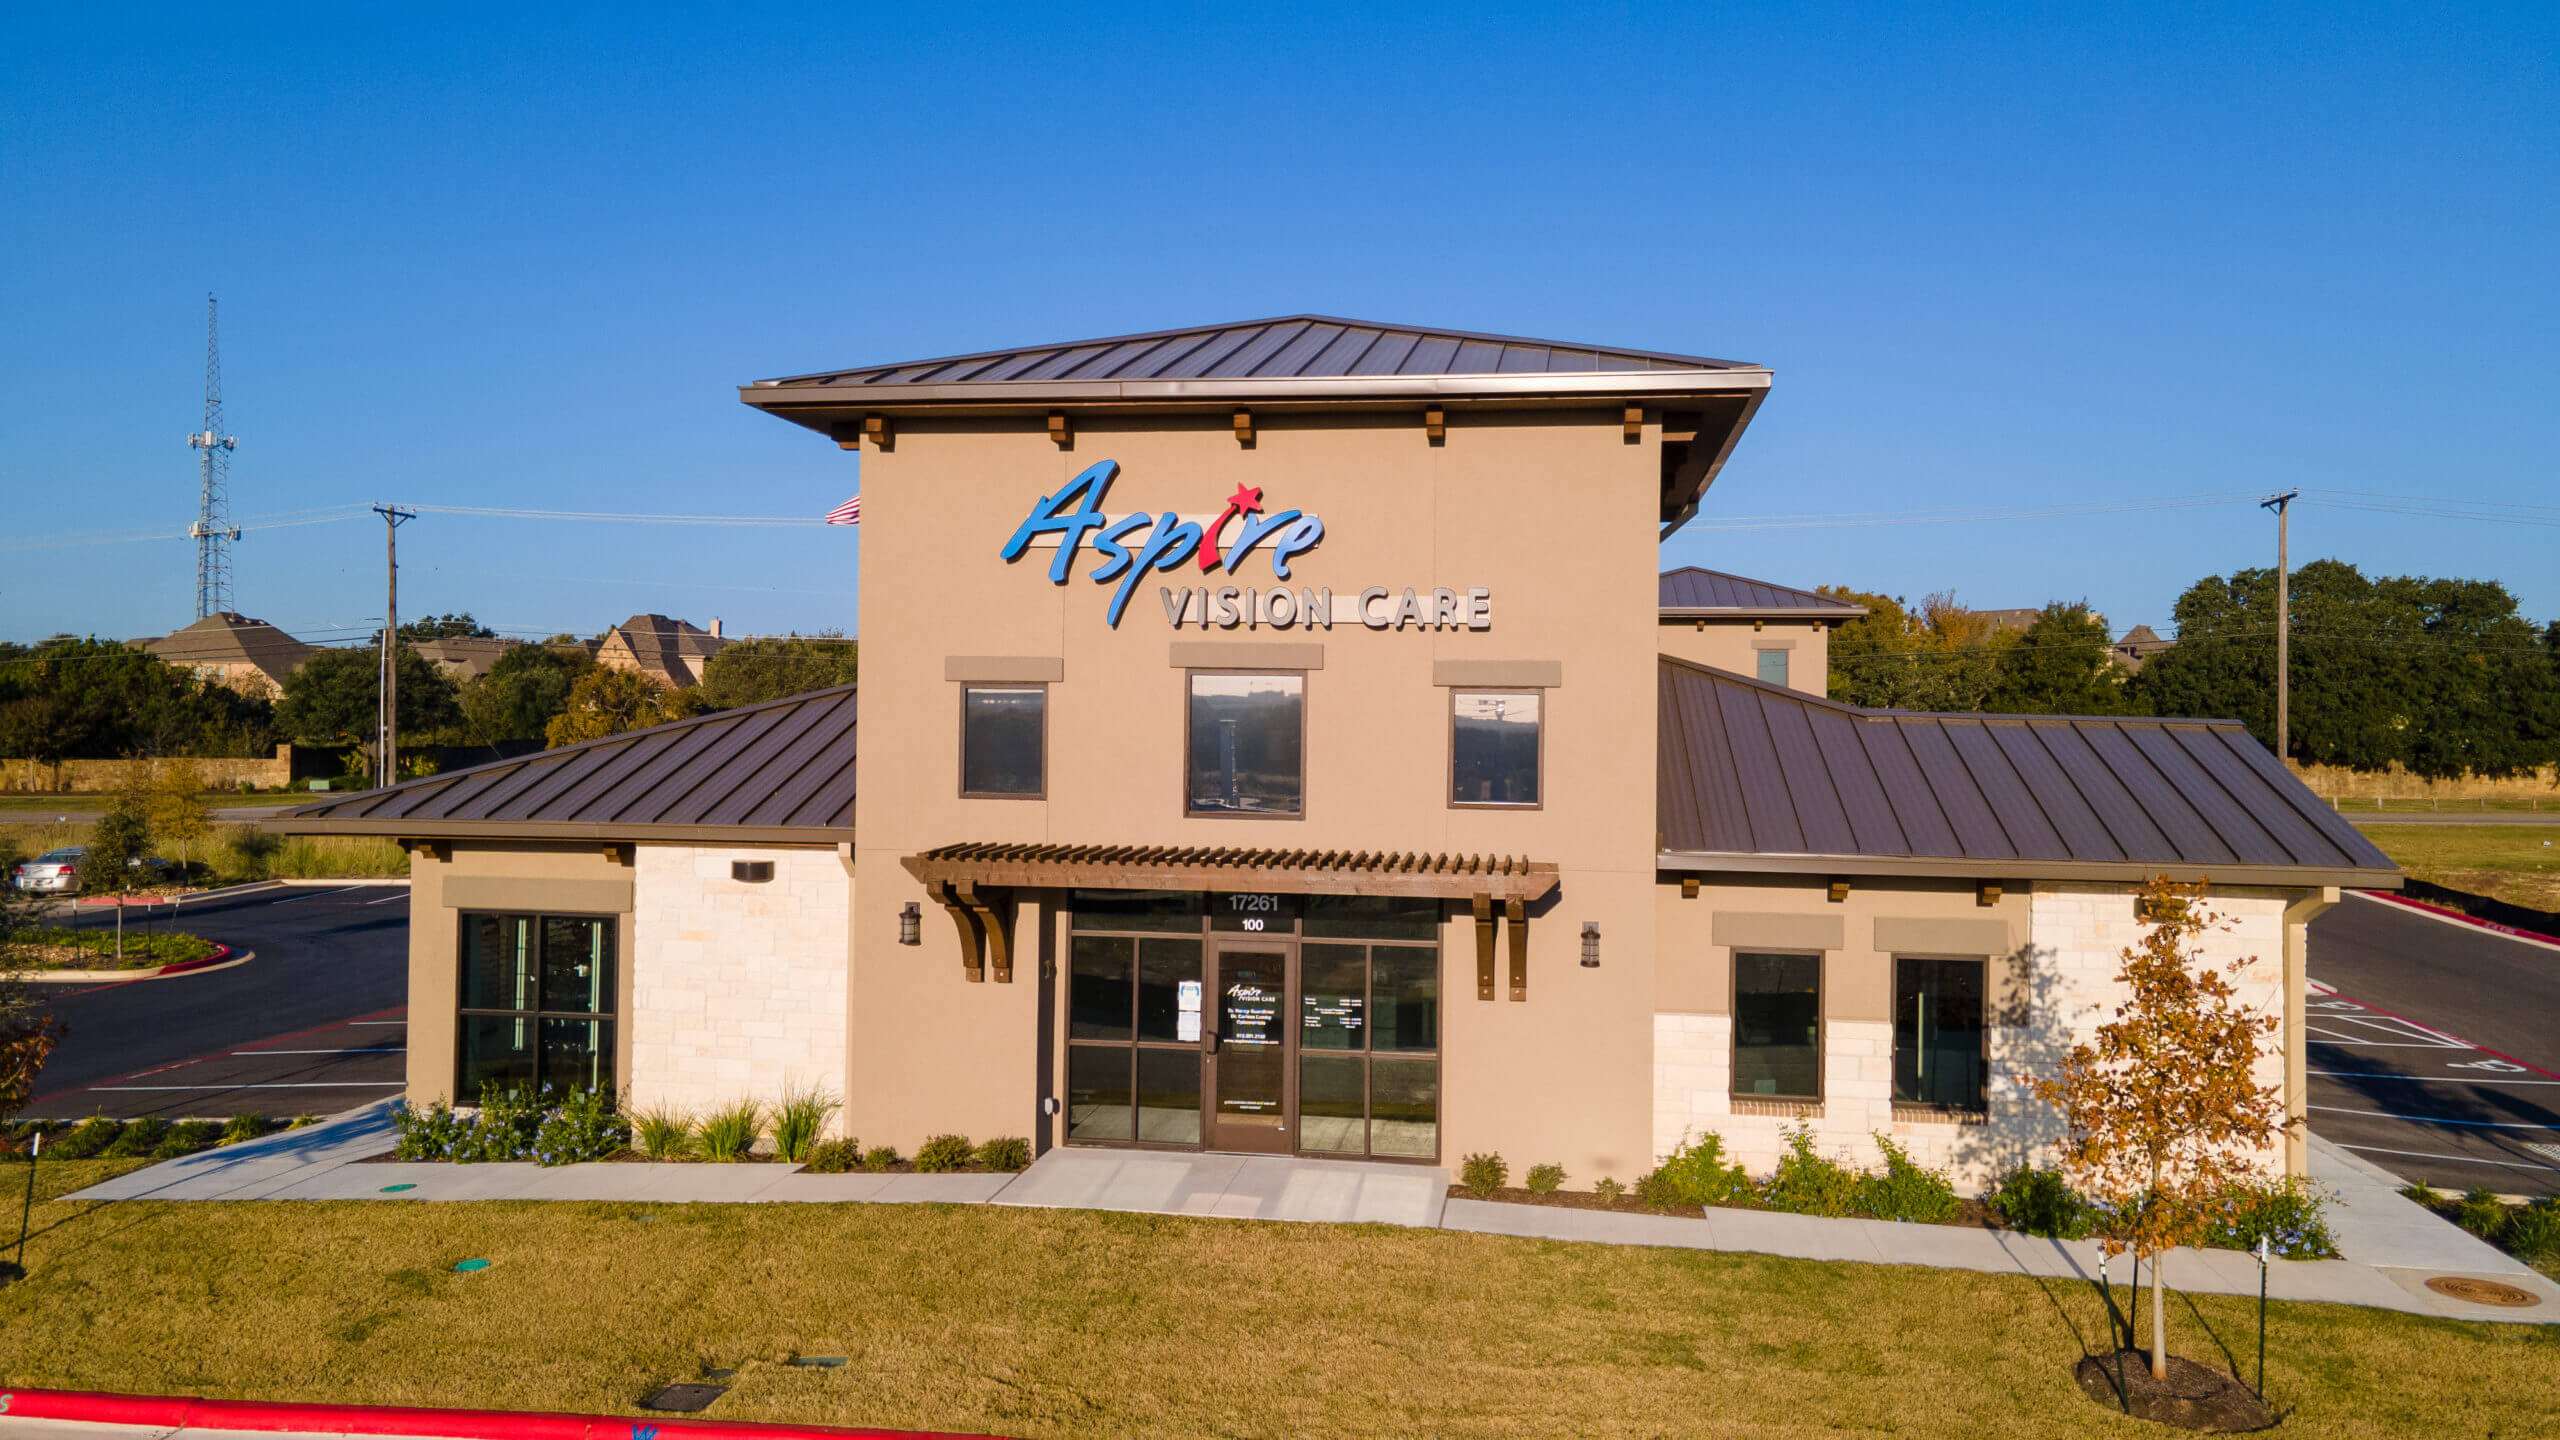 Our Round Rock, Texas Eye Care clinic